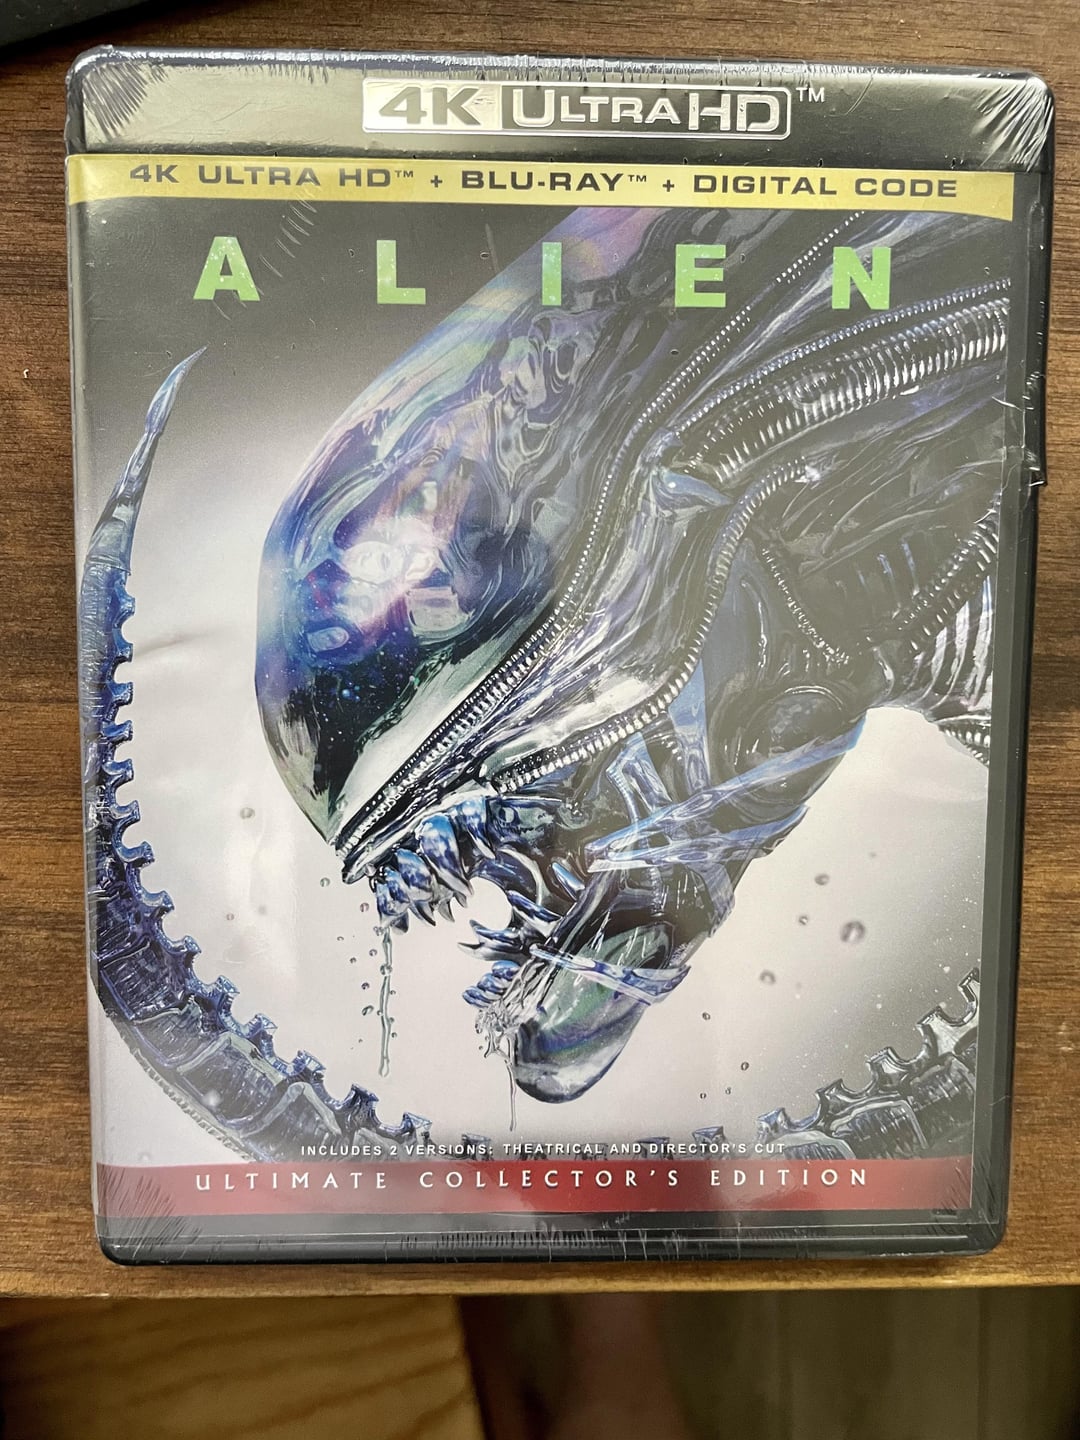 ordered-alien-40th-anniversary-uhd-edition-and-received-this-v0-min0dsr8y3mb1.jpg